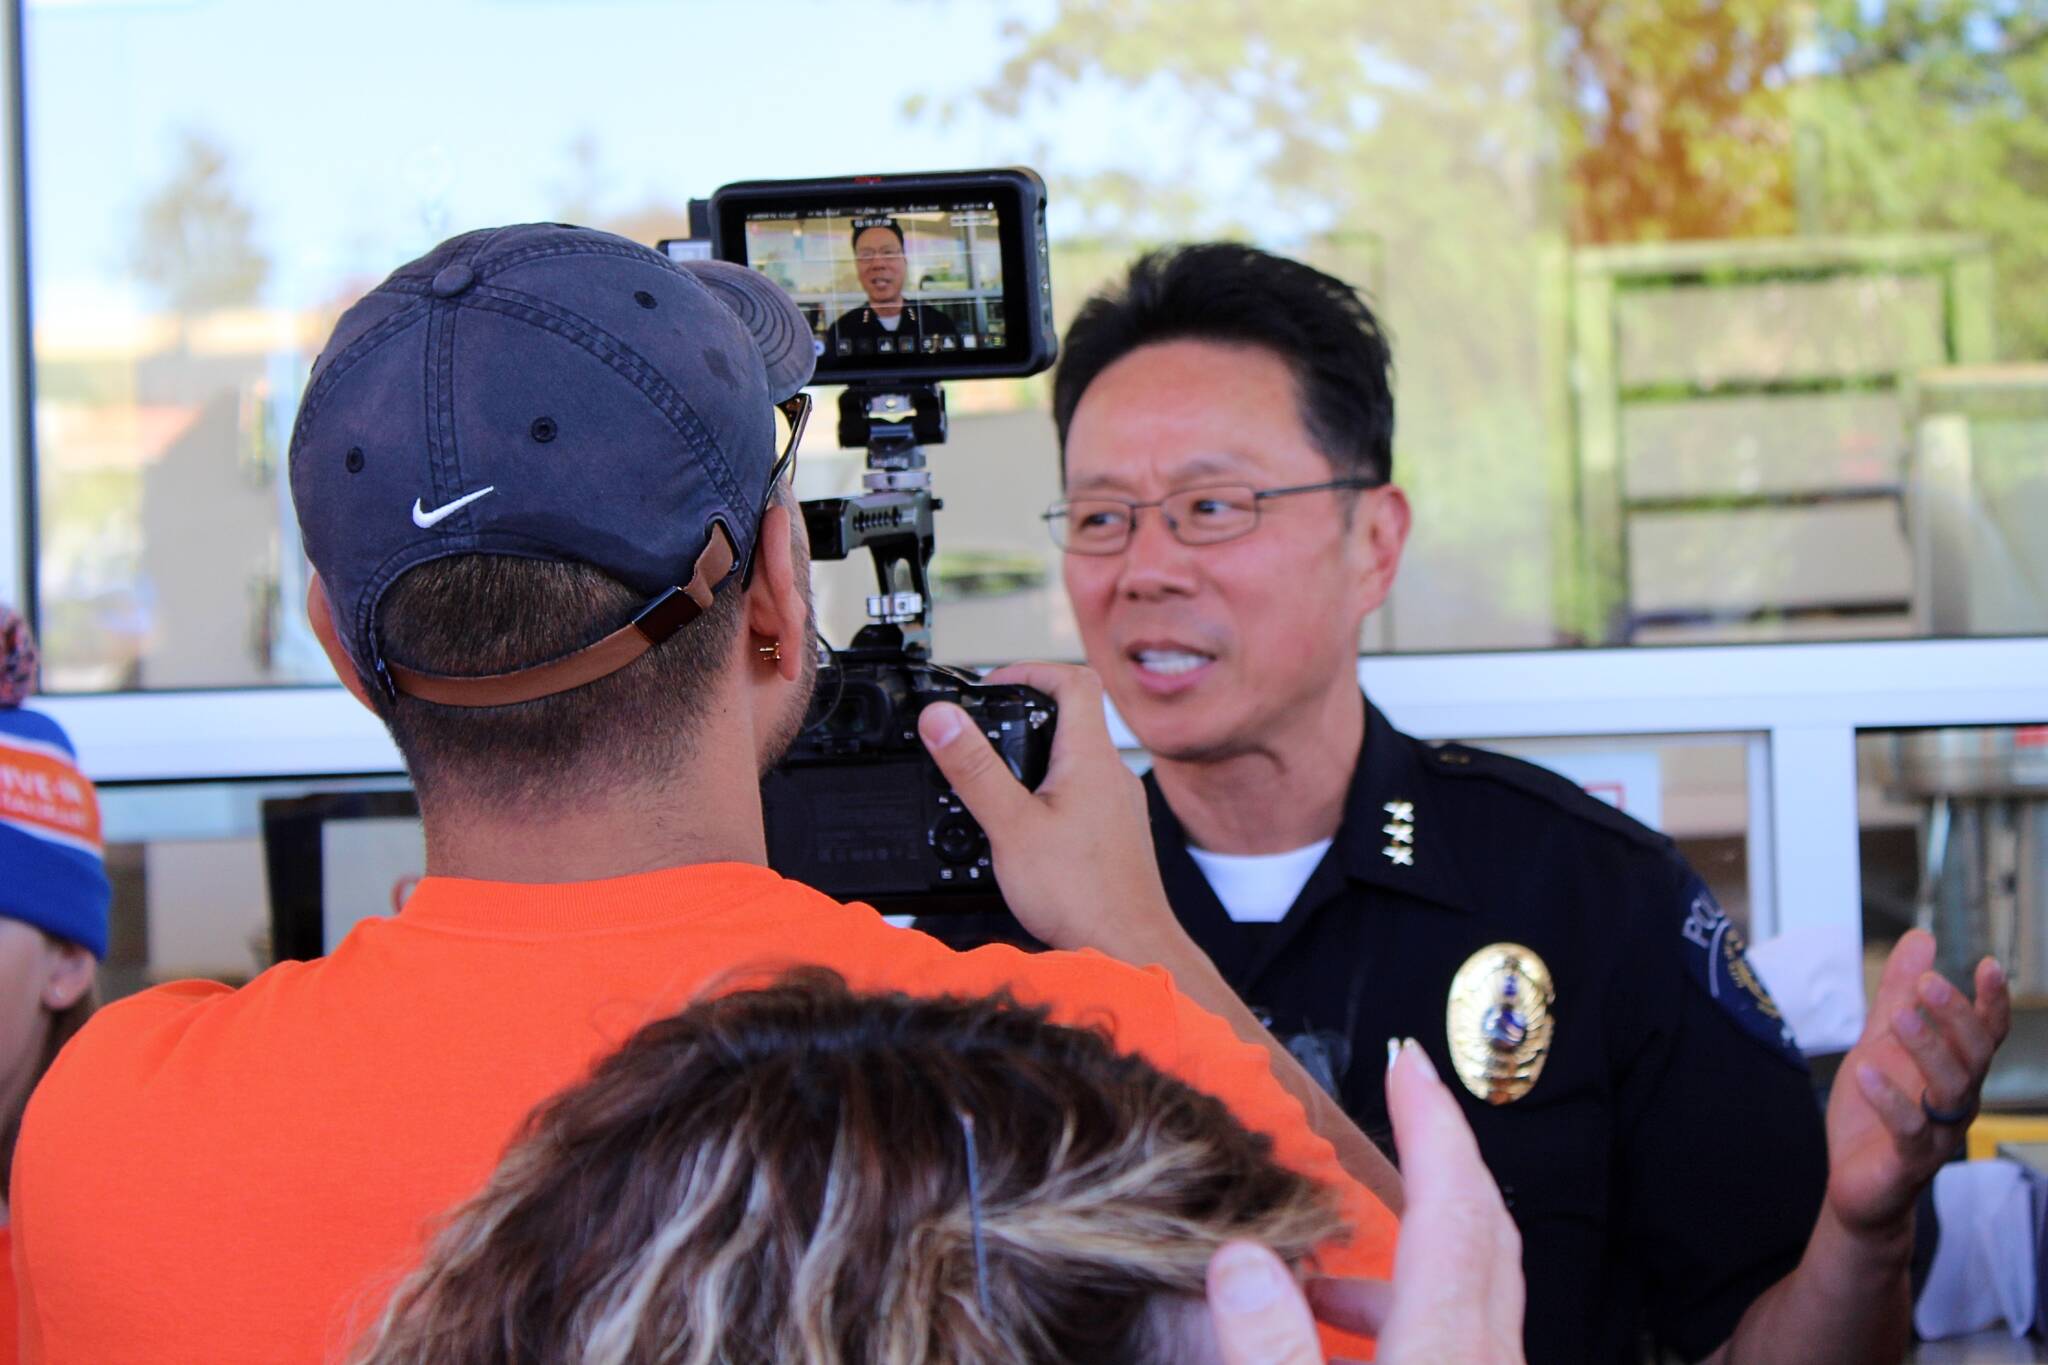 Federal Way Police Chief Andy Hwang was among the public officials interviewed July 27 at the opening of Dick’s Drive-In in Federal Way. (Alex Bruell / The Mirror)